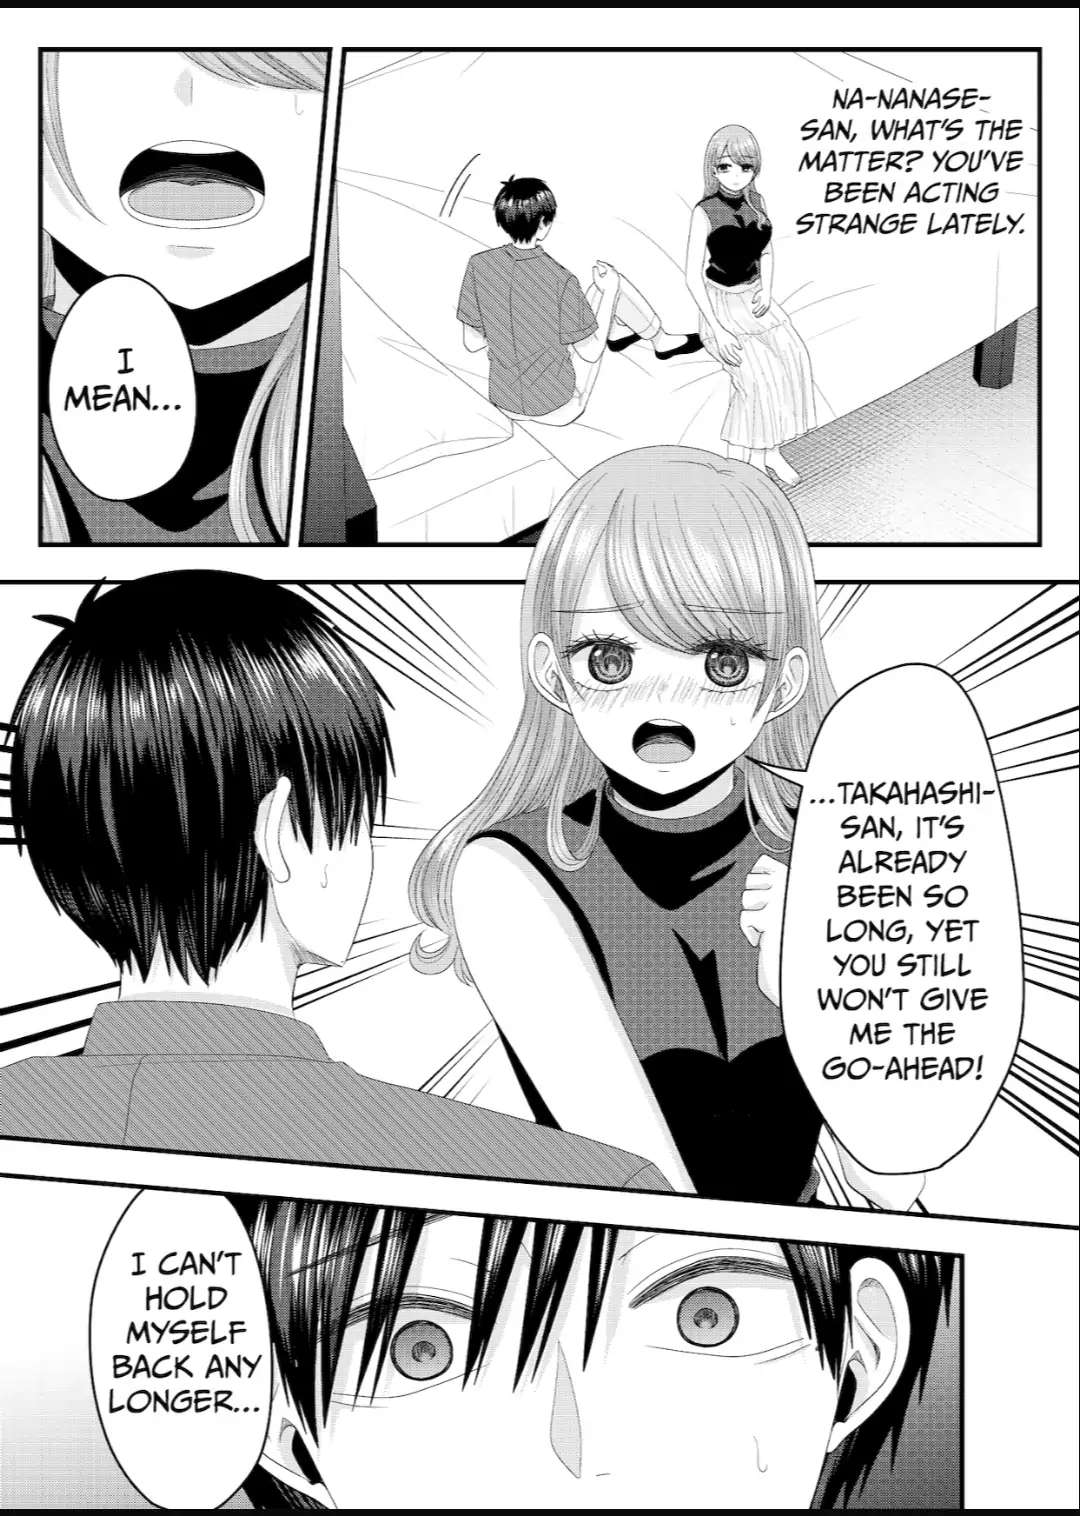 Nanase-San’s Crazy Love Obsession chapter 13 - page 2